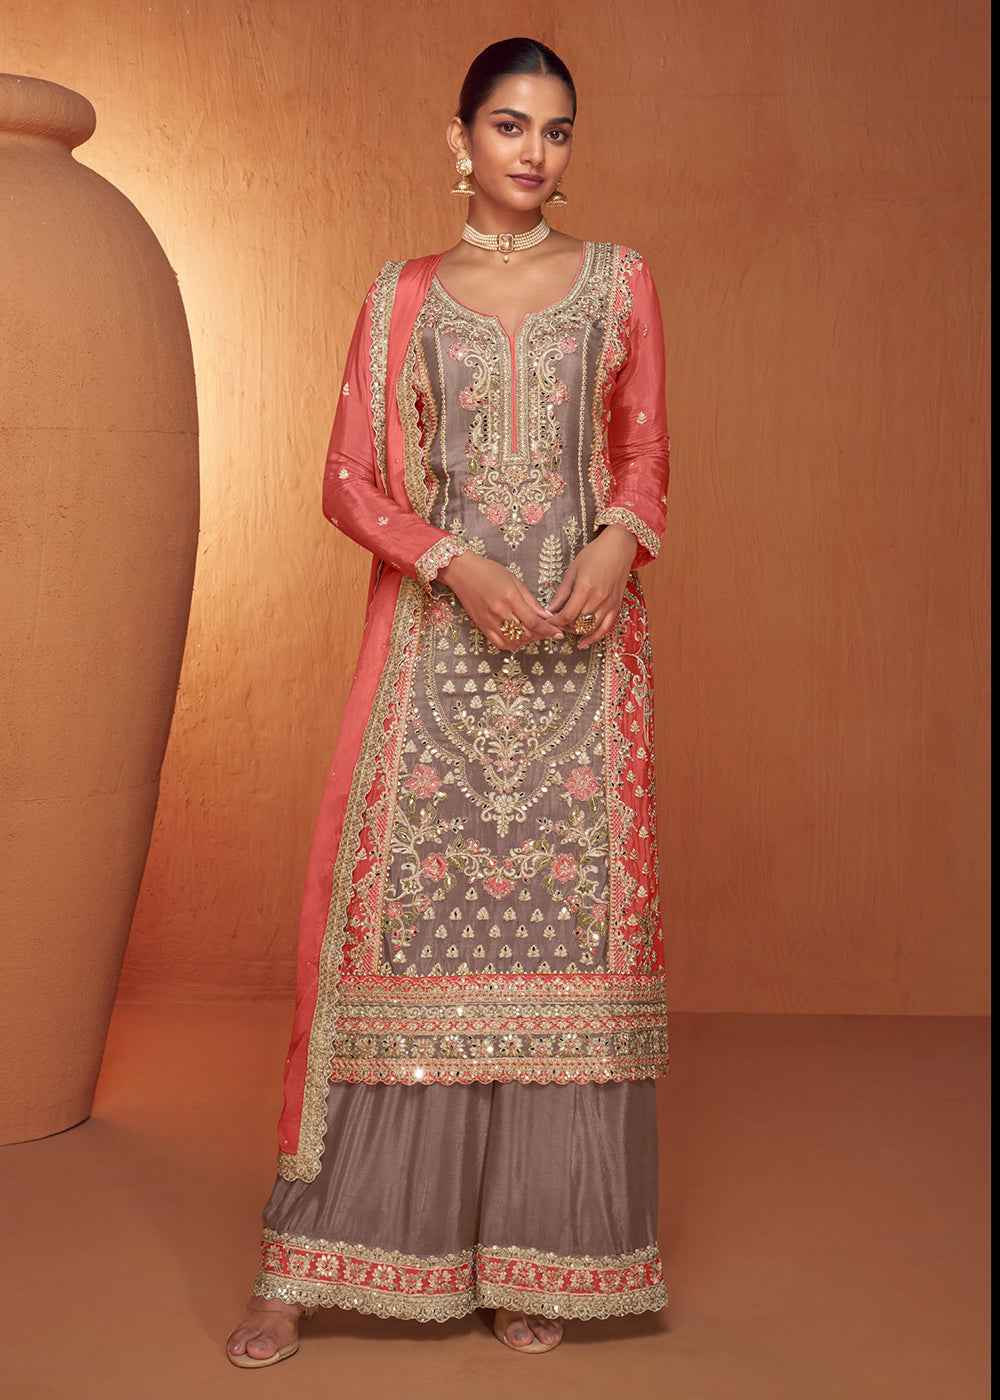 Shop Now Dusty Mauve & Peach Embroidered Wedding Sharara Suit Online at Empress Clothing in USA, UK, Canada, Italy & Worldwide.